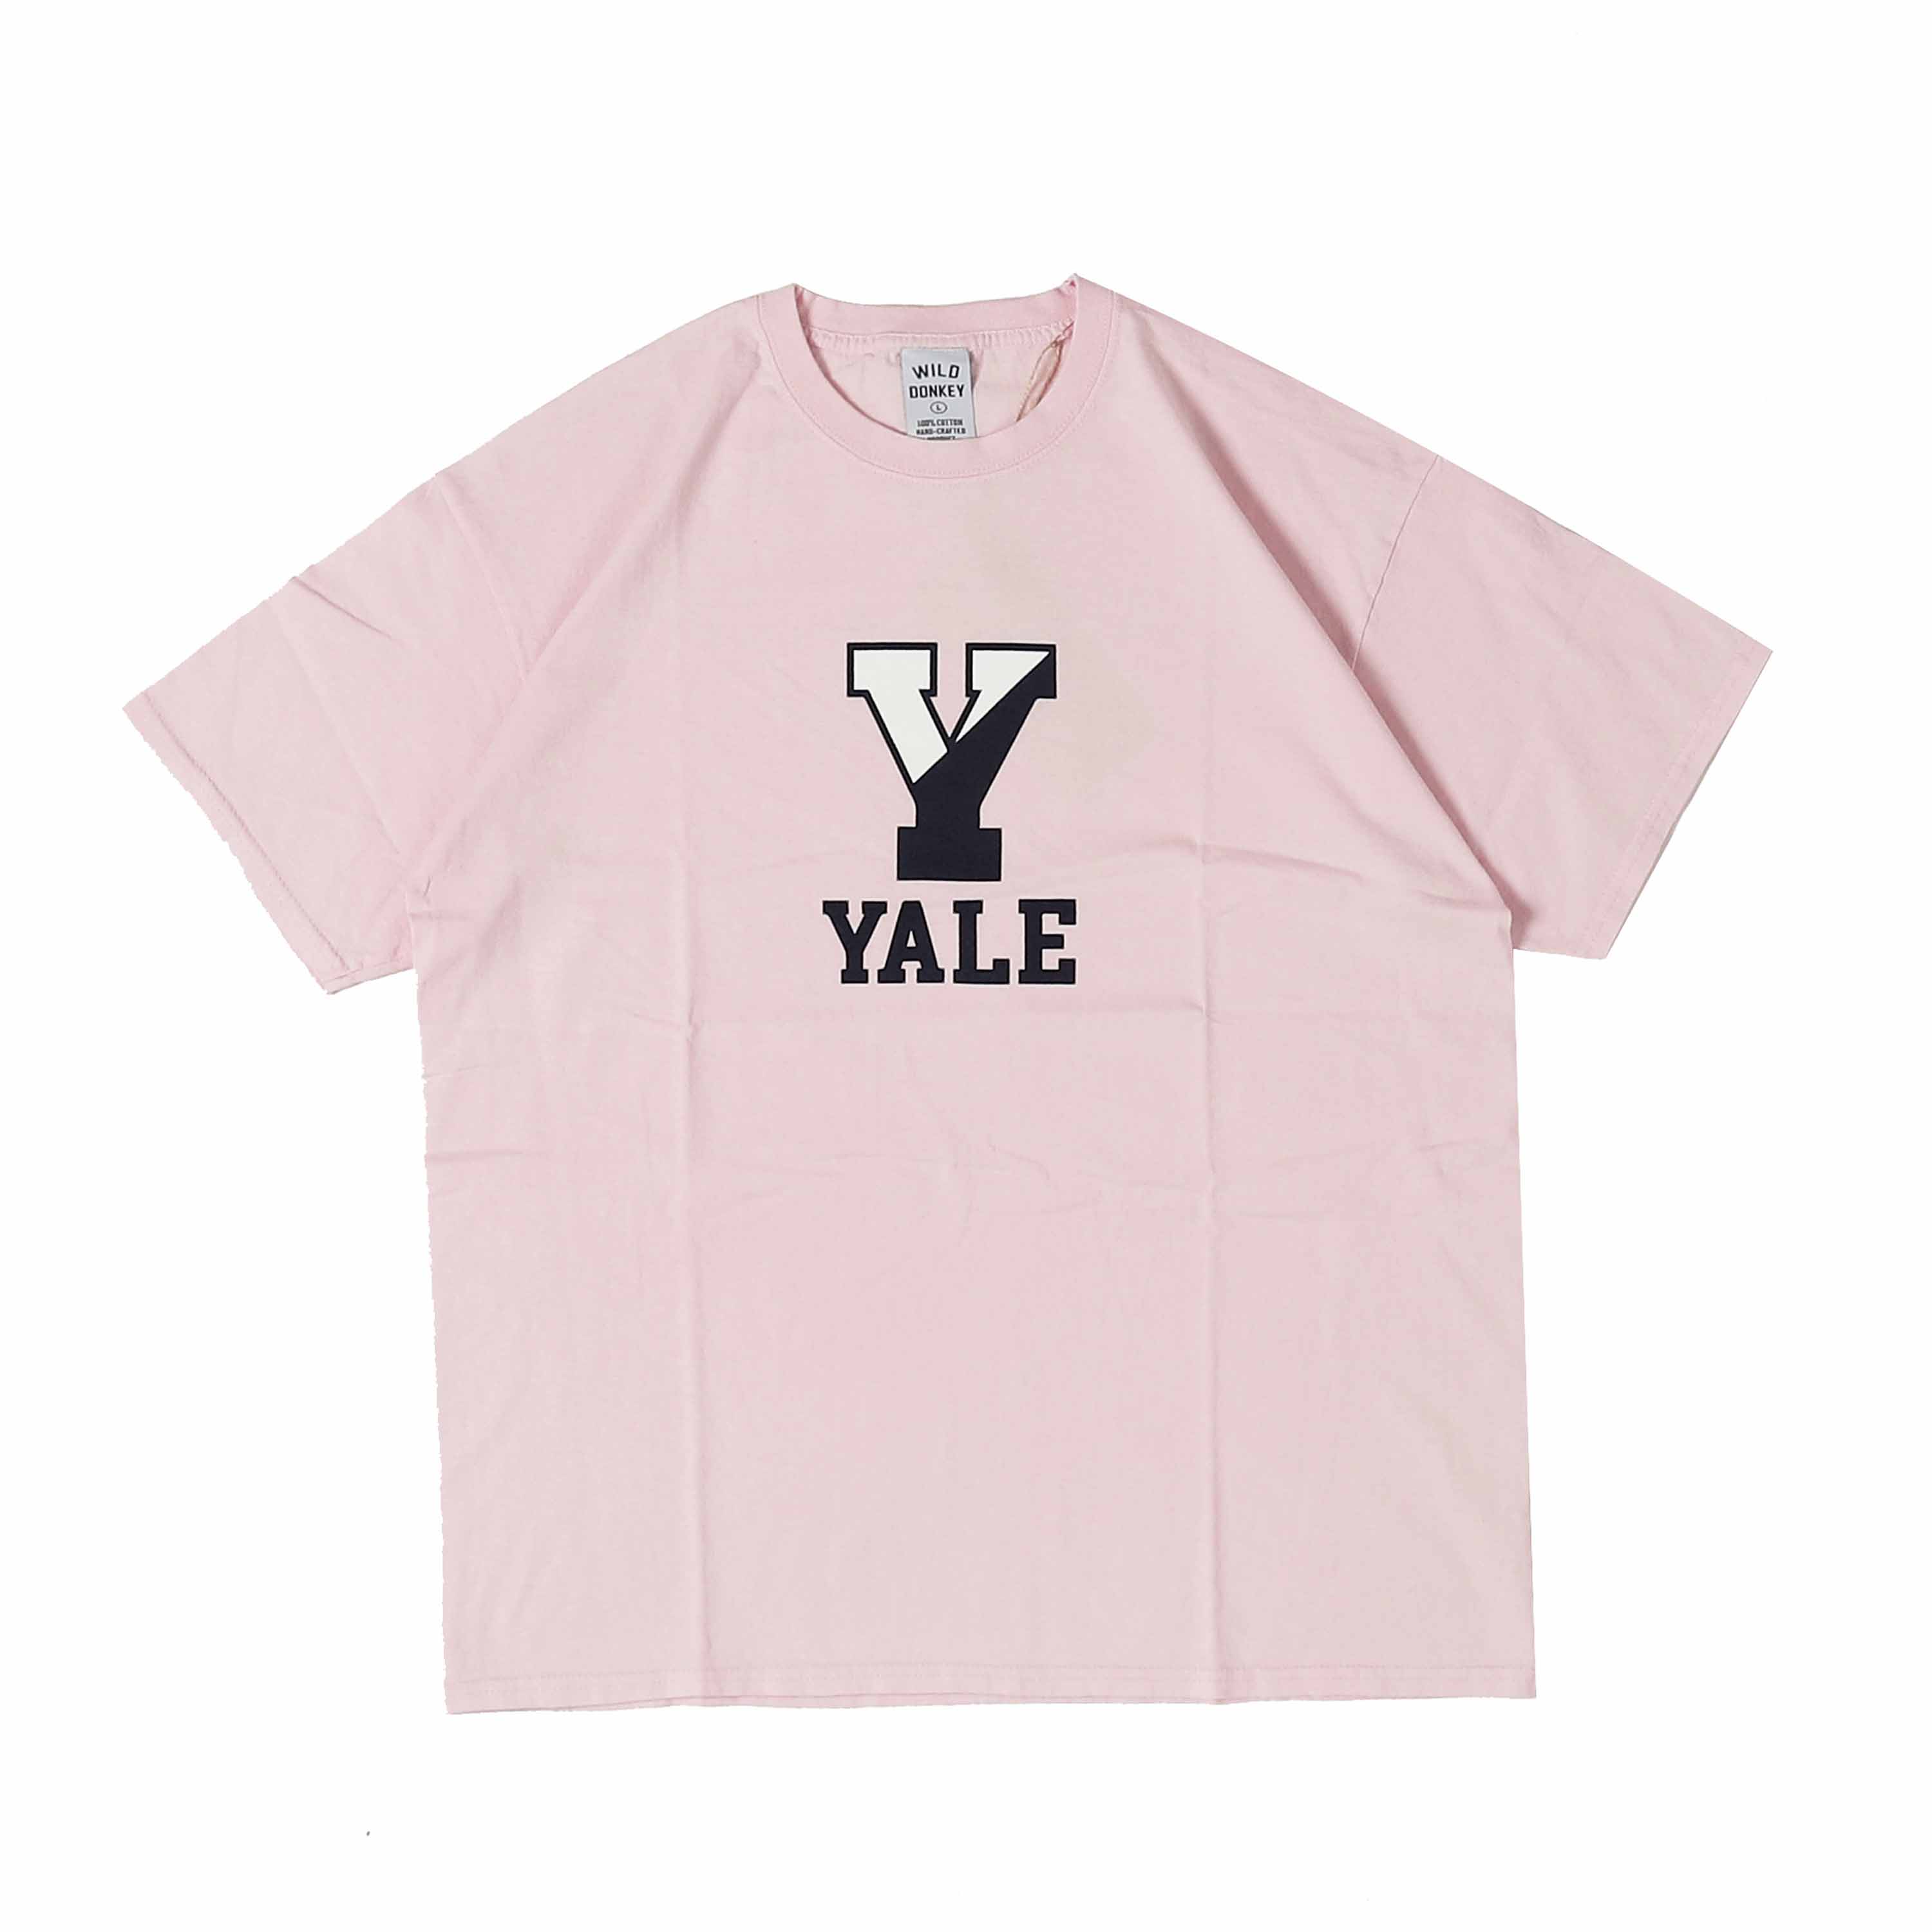 T-YALE S/S TEE - PINK